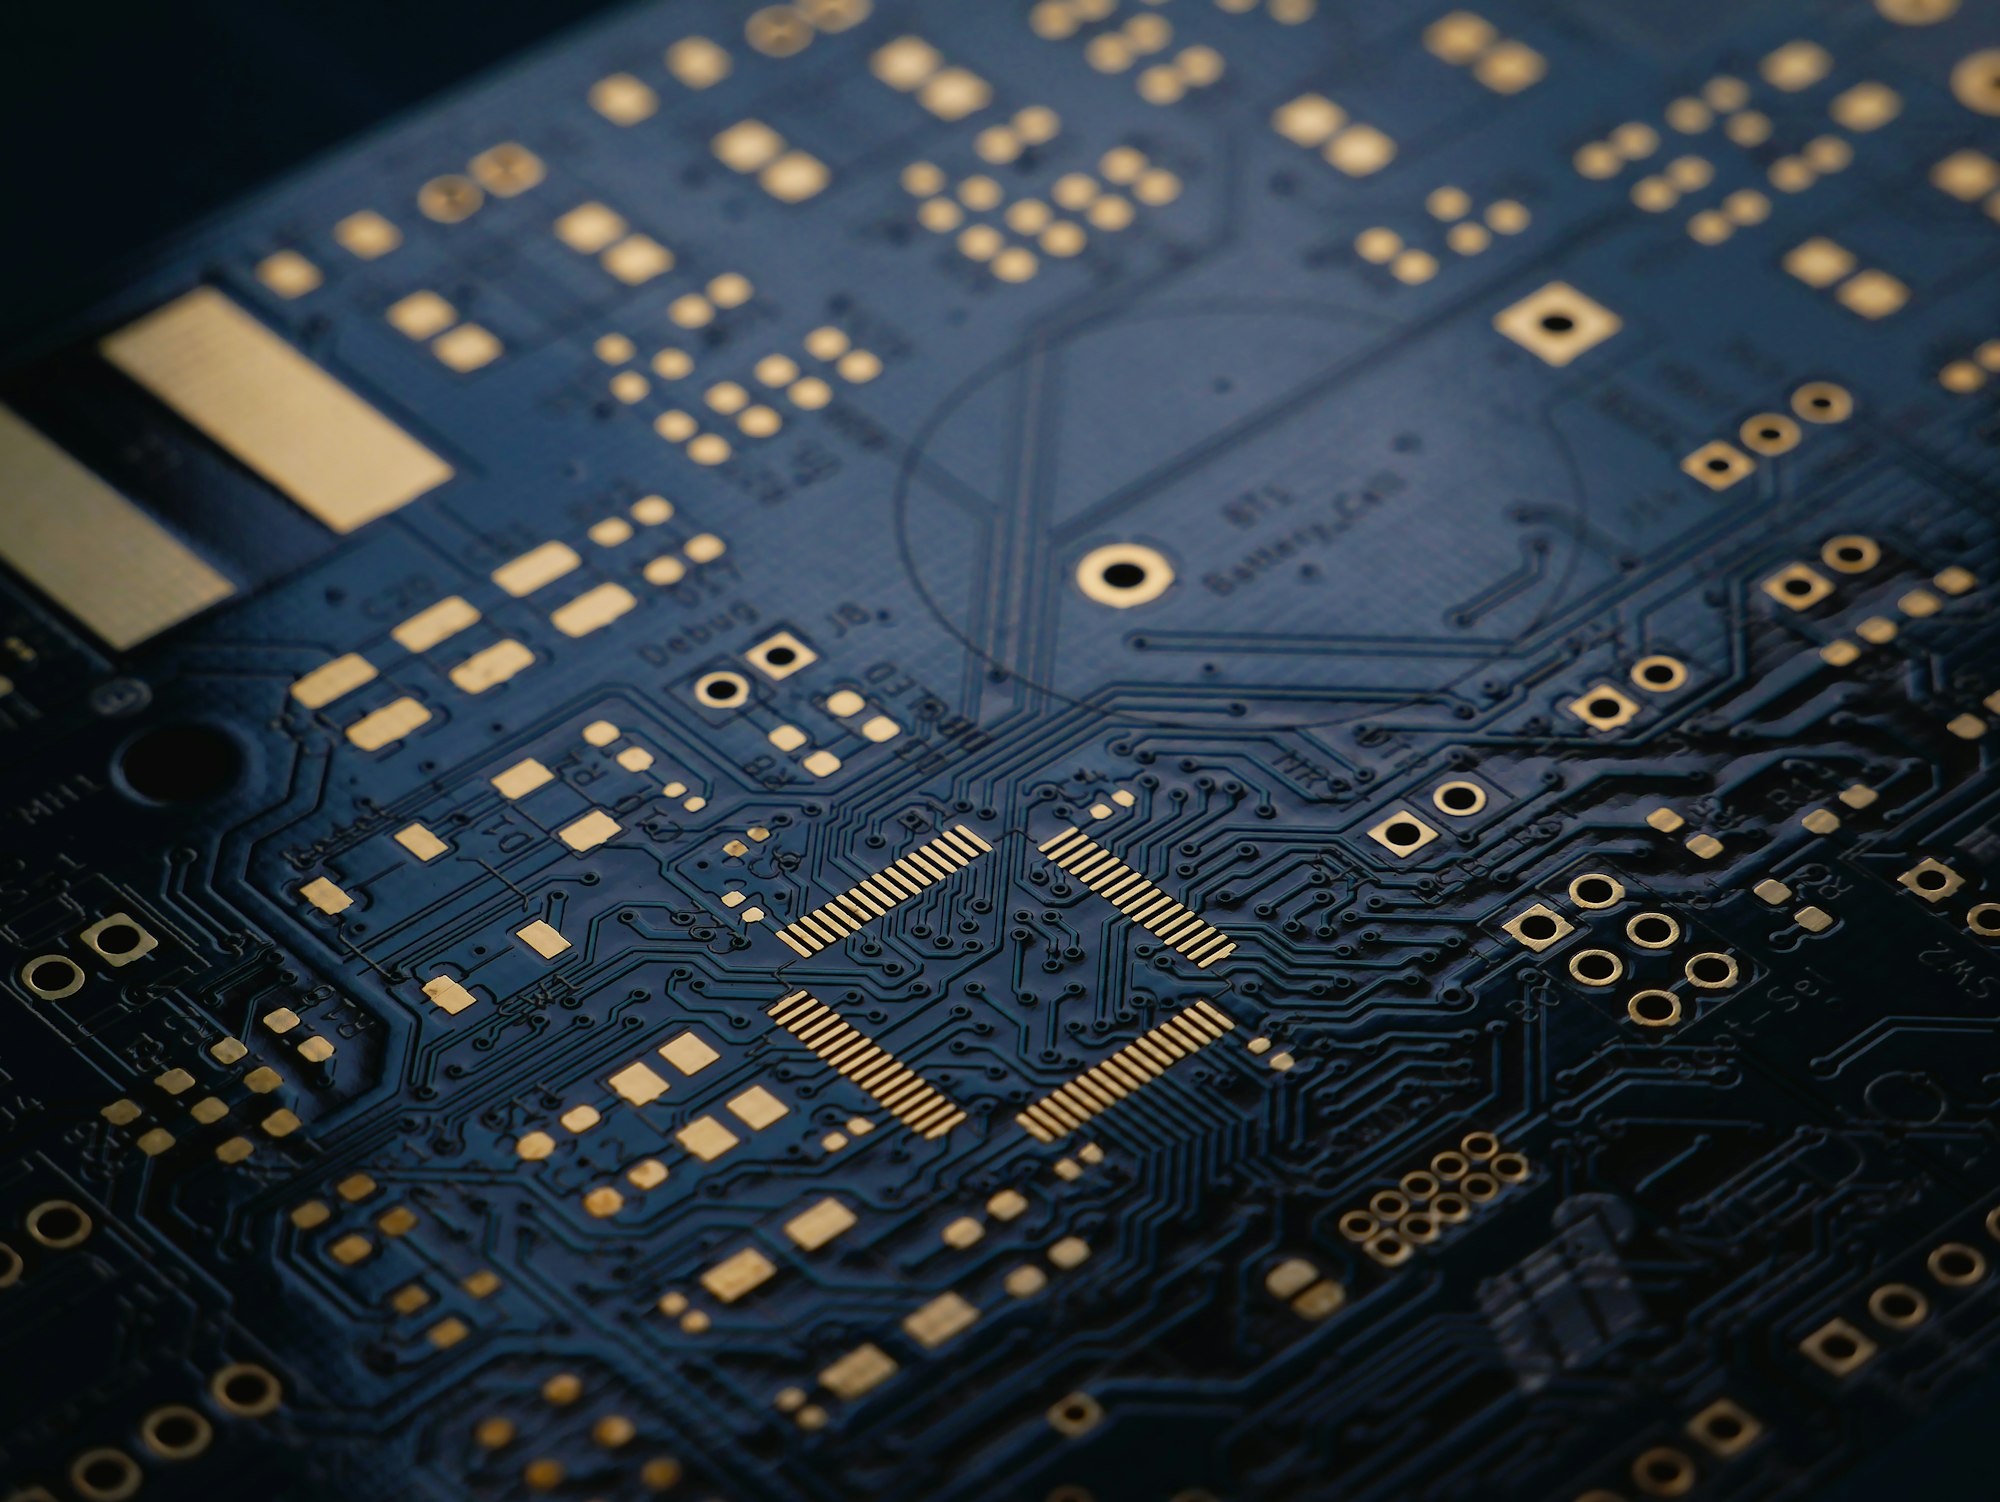 A low exposure photograph of an unsoldered Printed Circuit Board (PCB) with ENIG (Gold) finish.